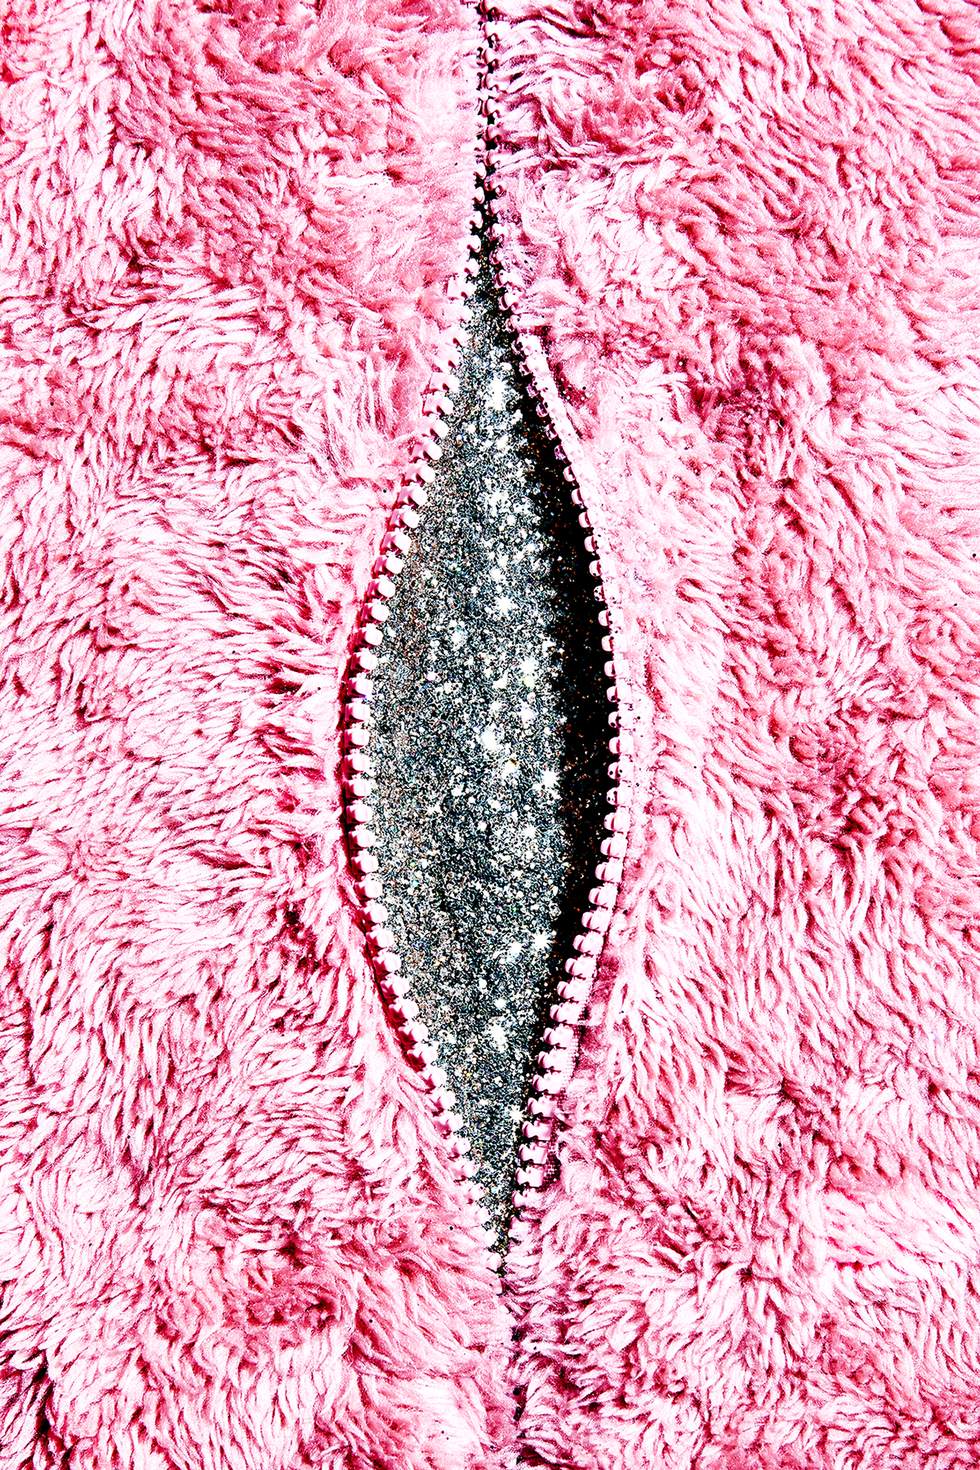 textured fabric and zipper referencing vagina